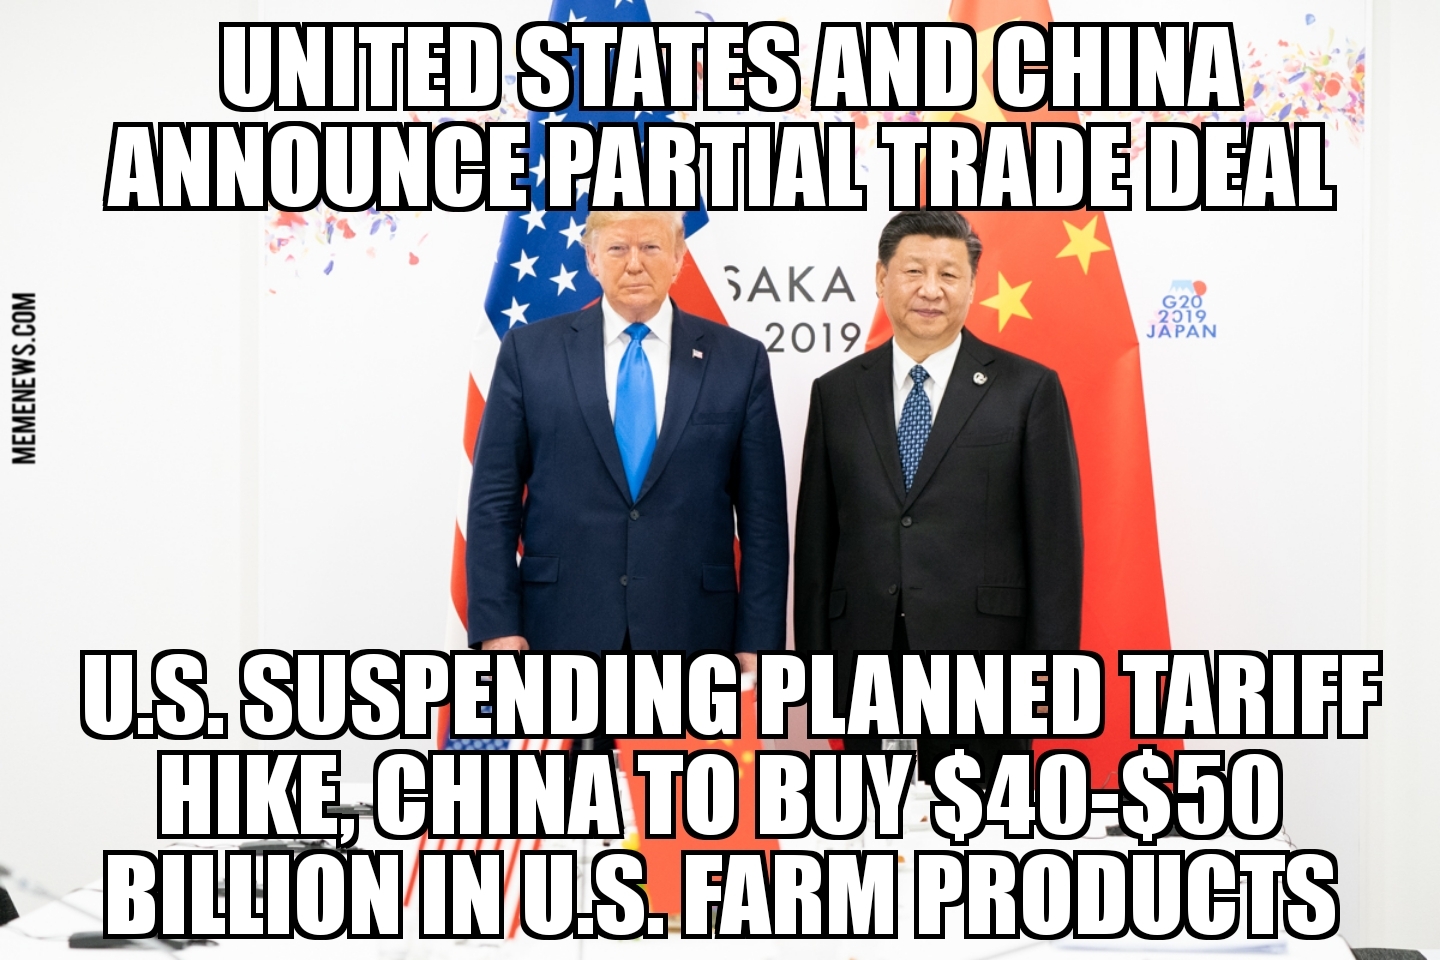 United States and China announce partial trade deal